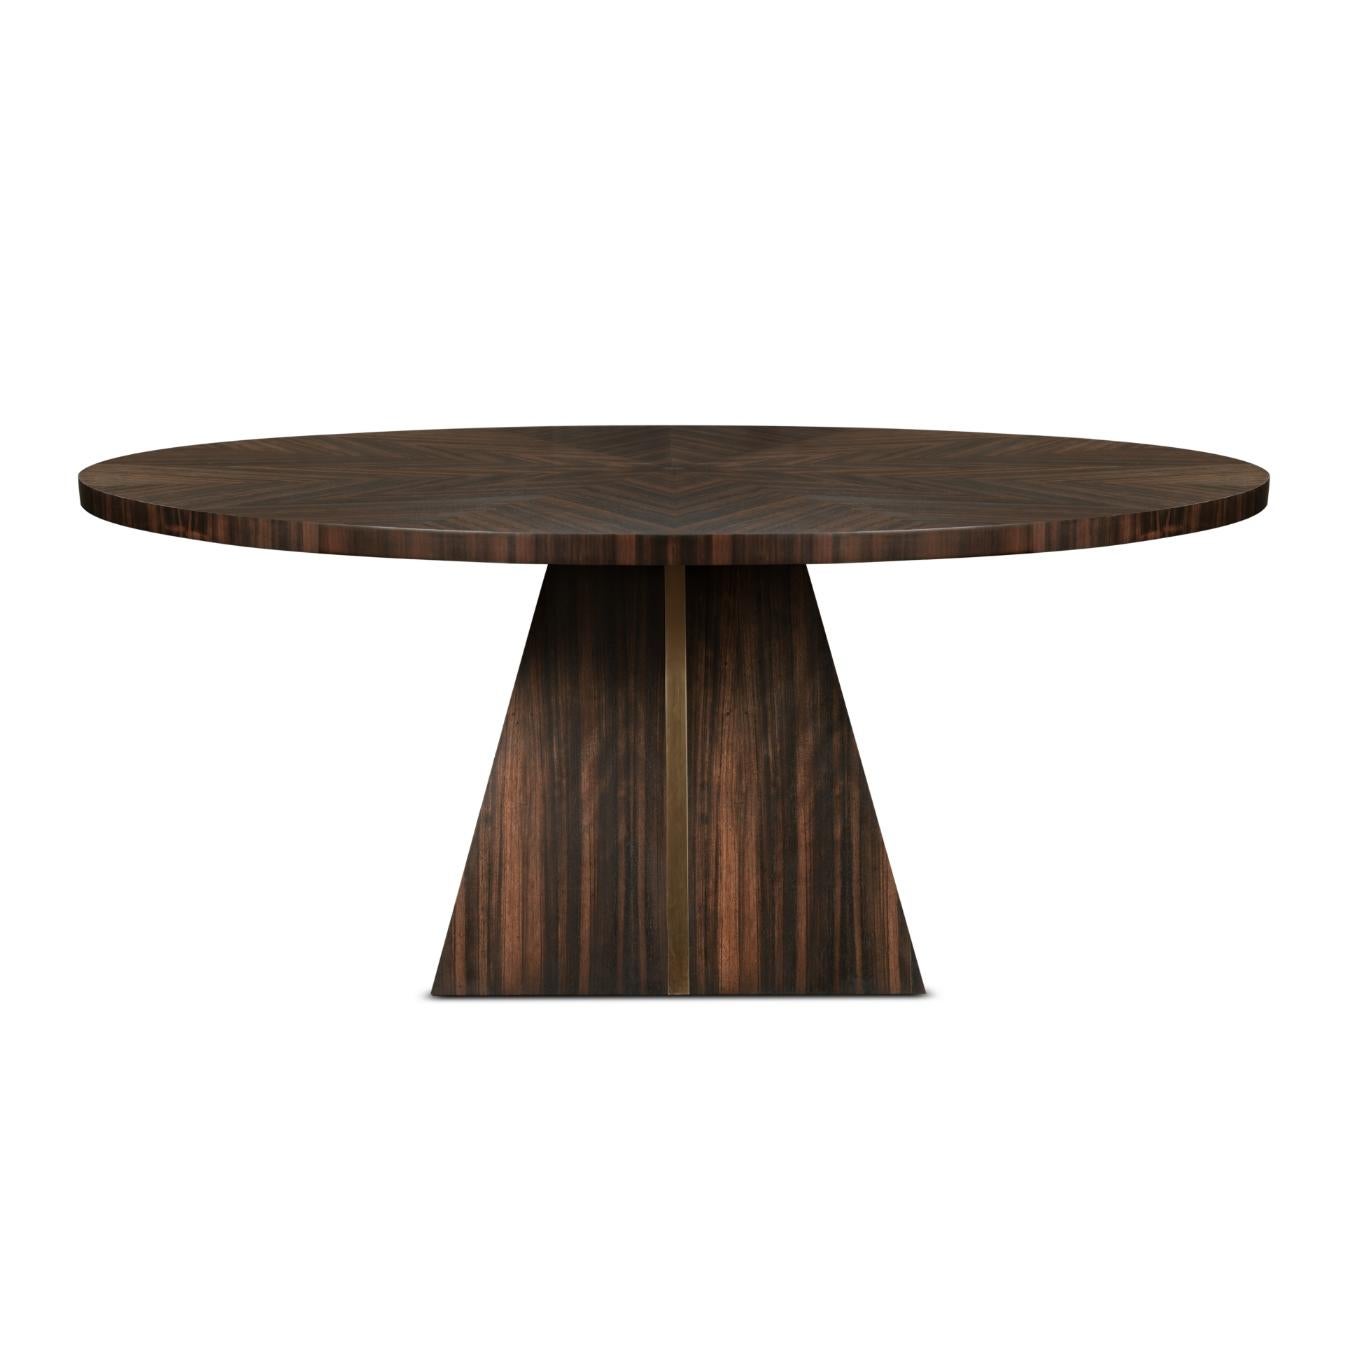 This ebony veneered dining table has a triangle-shaped base that is adorned with a brass strip on its side. The tabletop has a unique star design, complete with a waxed finish.
 